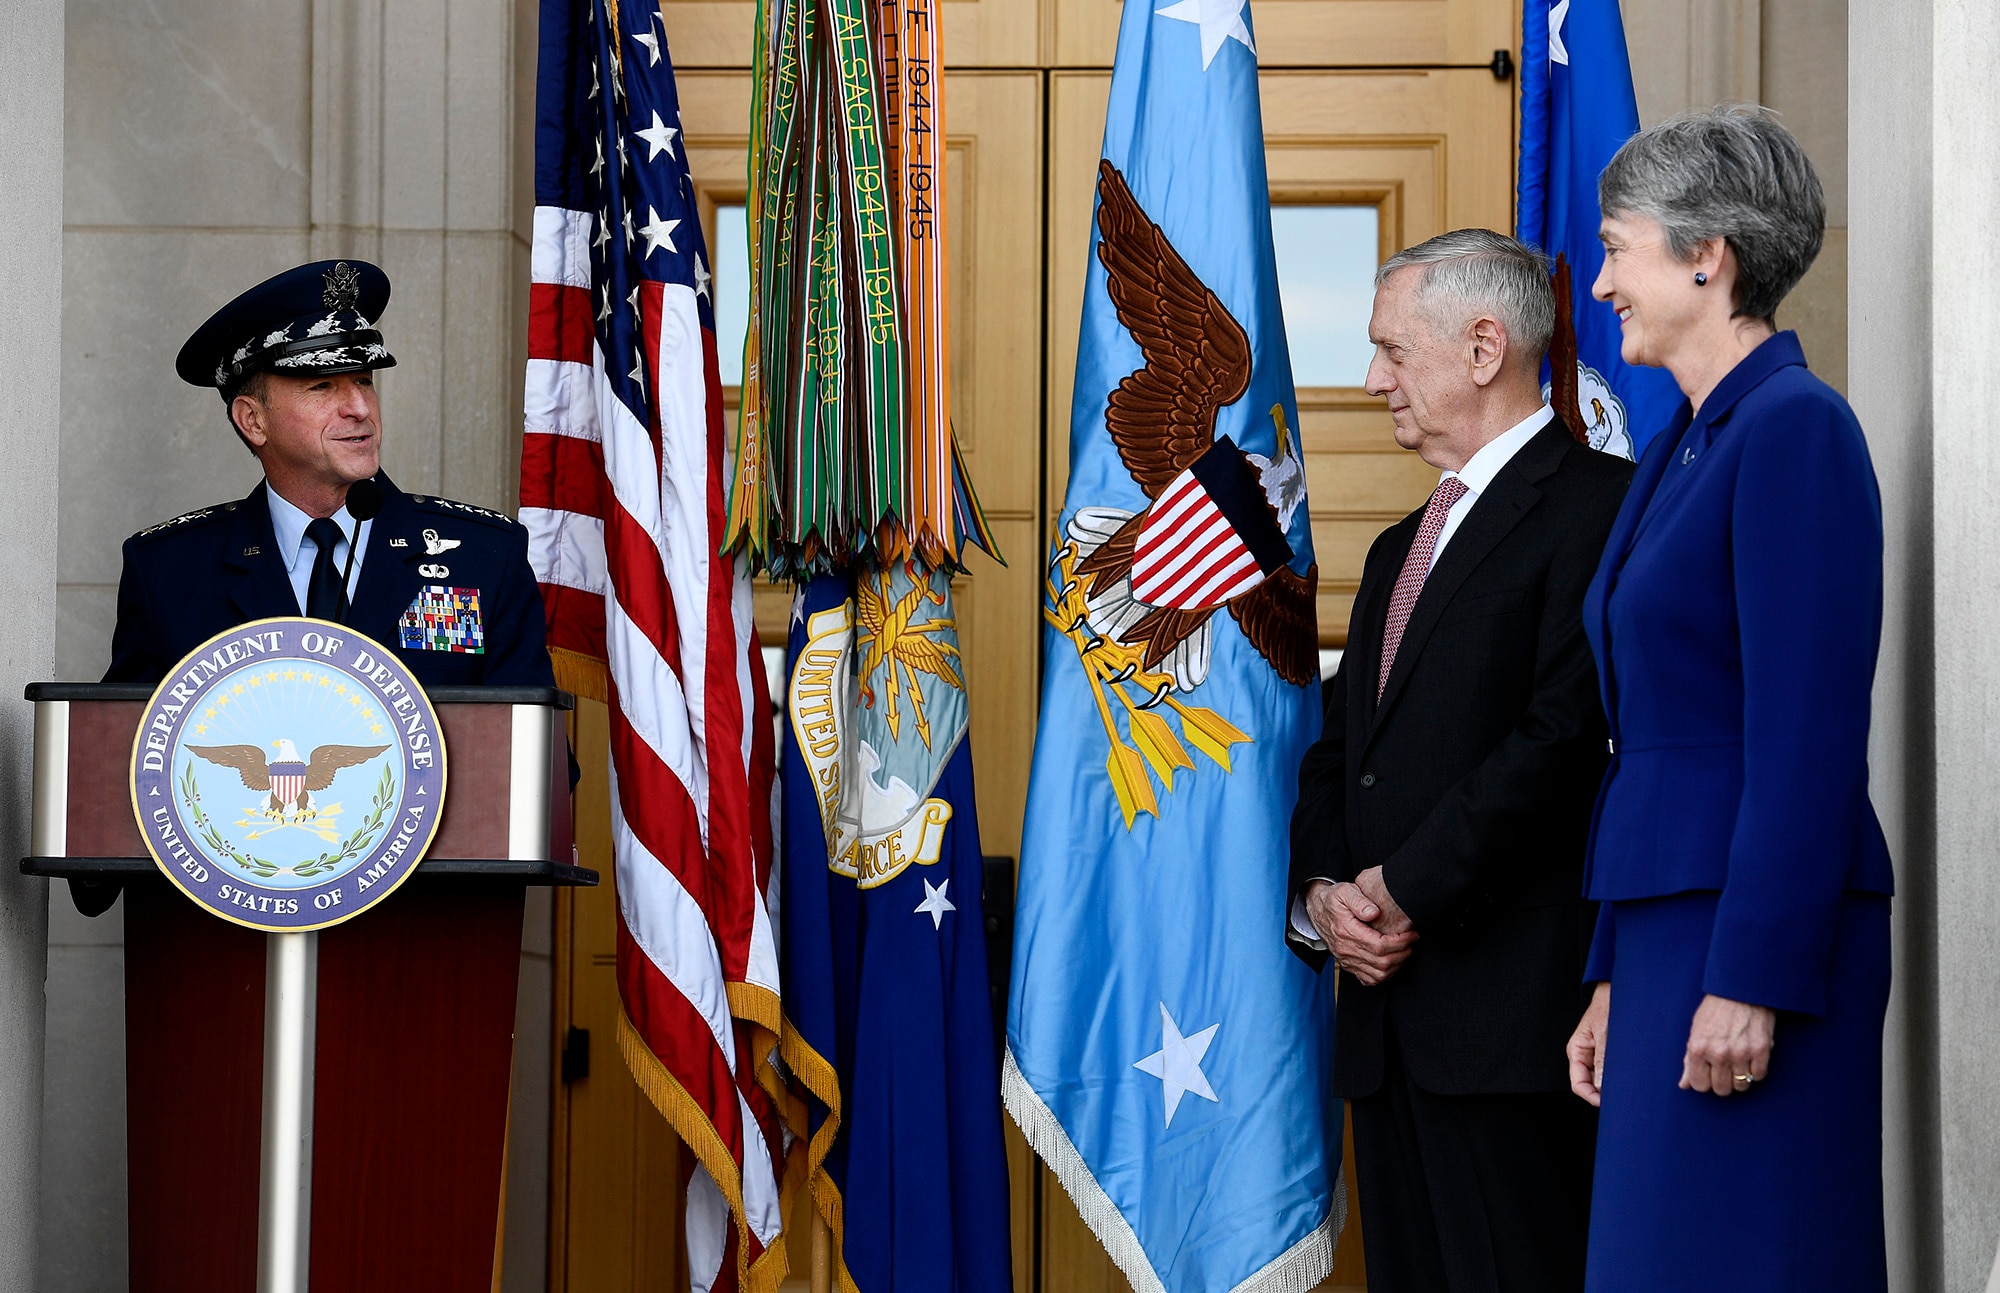 Air Force Chief of Staff Gen. David L. Goldfein congratulates Secretary of the Air Force Heather Wilson during her ceremonial oath, making her the 24th secretary during a Pentagon event, May 16, 2017.  Secretary of Defense Jim Mattis delivered the oath during the ceremony. (U.S. Air Force photo/Scott M. Ash)